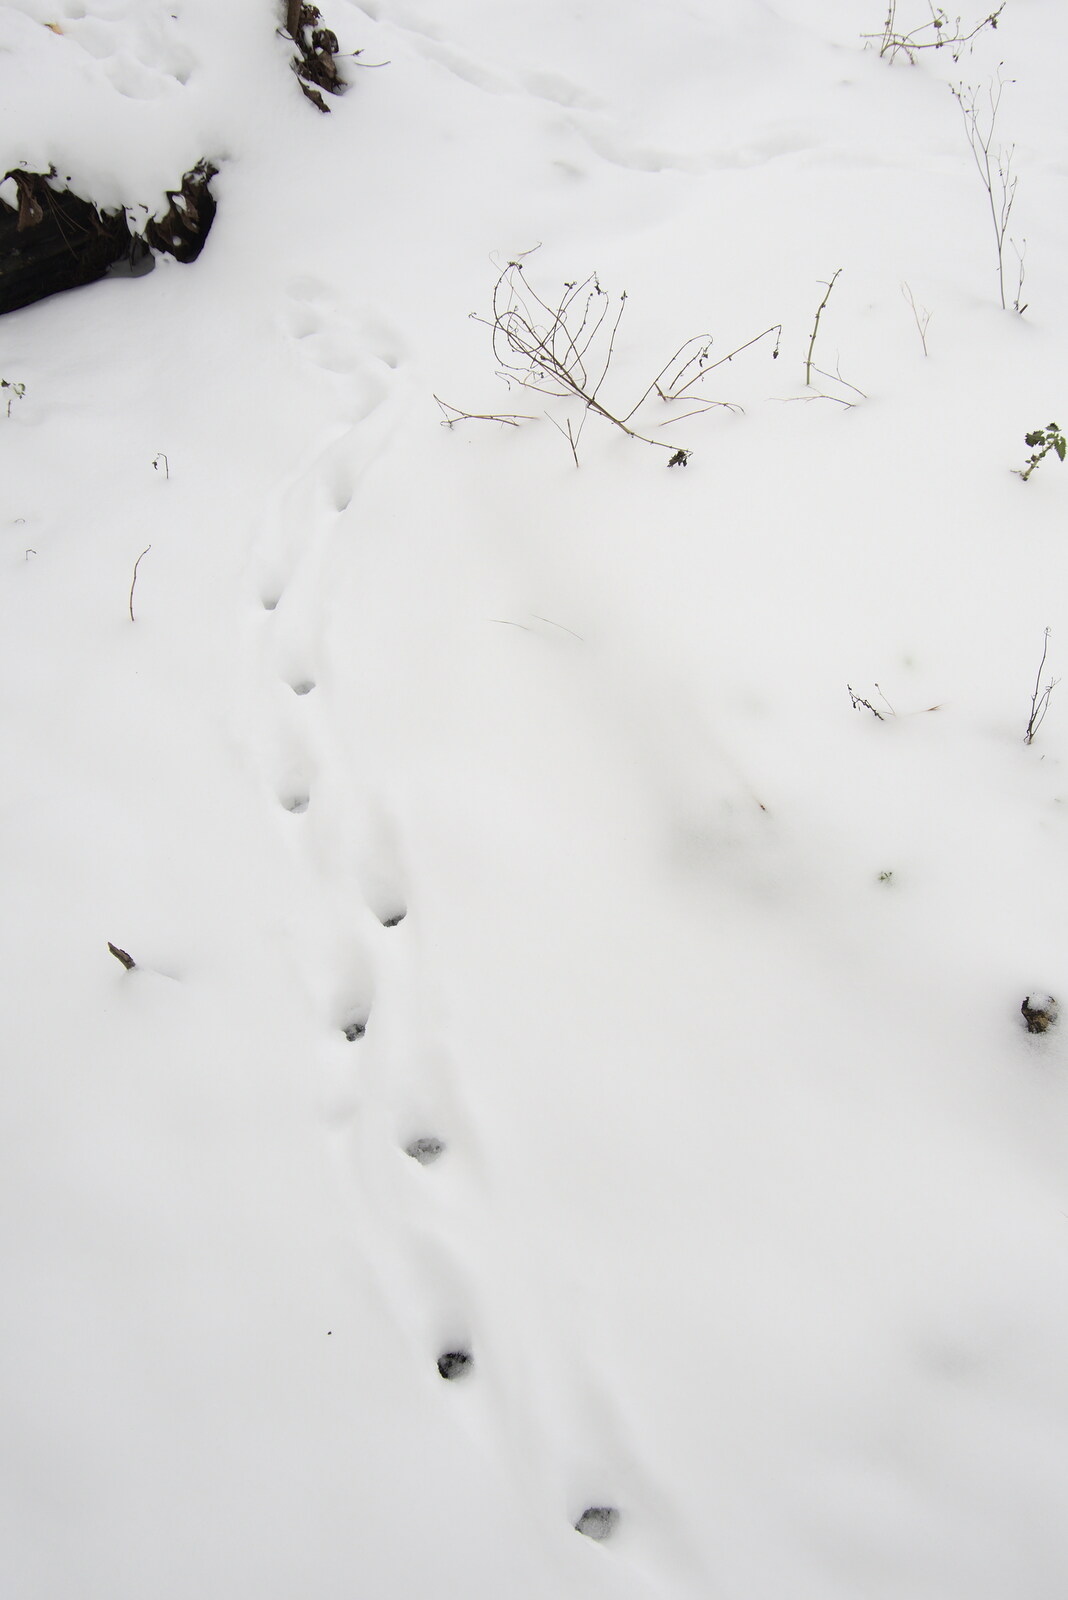 The tracks of Boris cat from Beast From The East Two - The Sequel, Brome, Suffolk - 8th February 2021